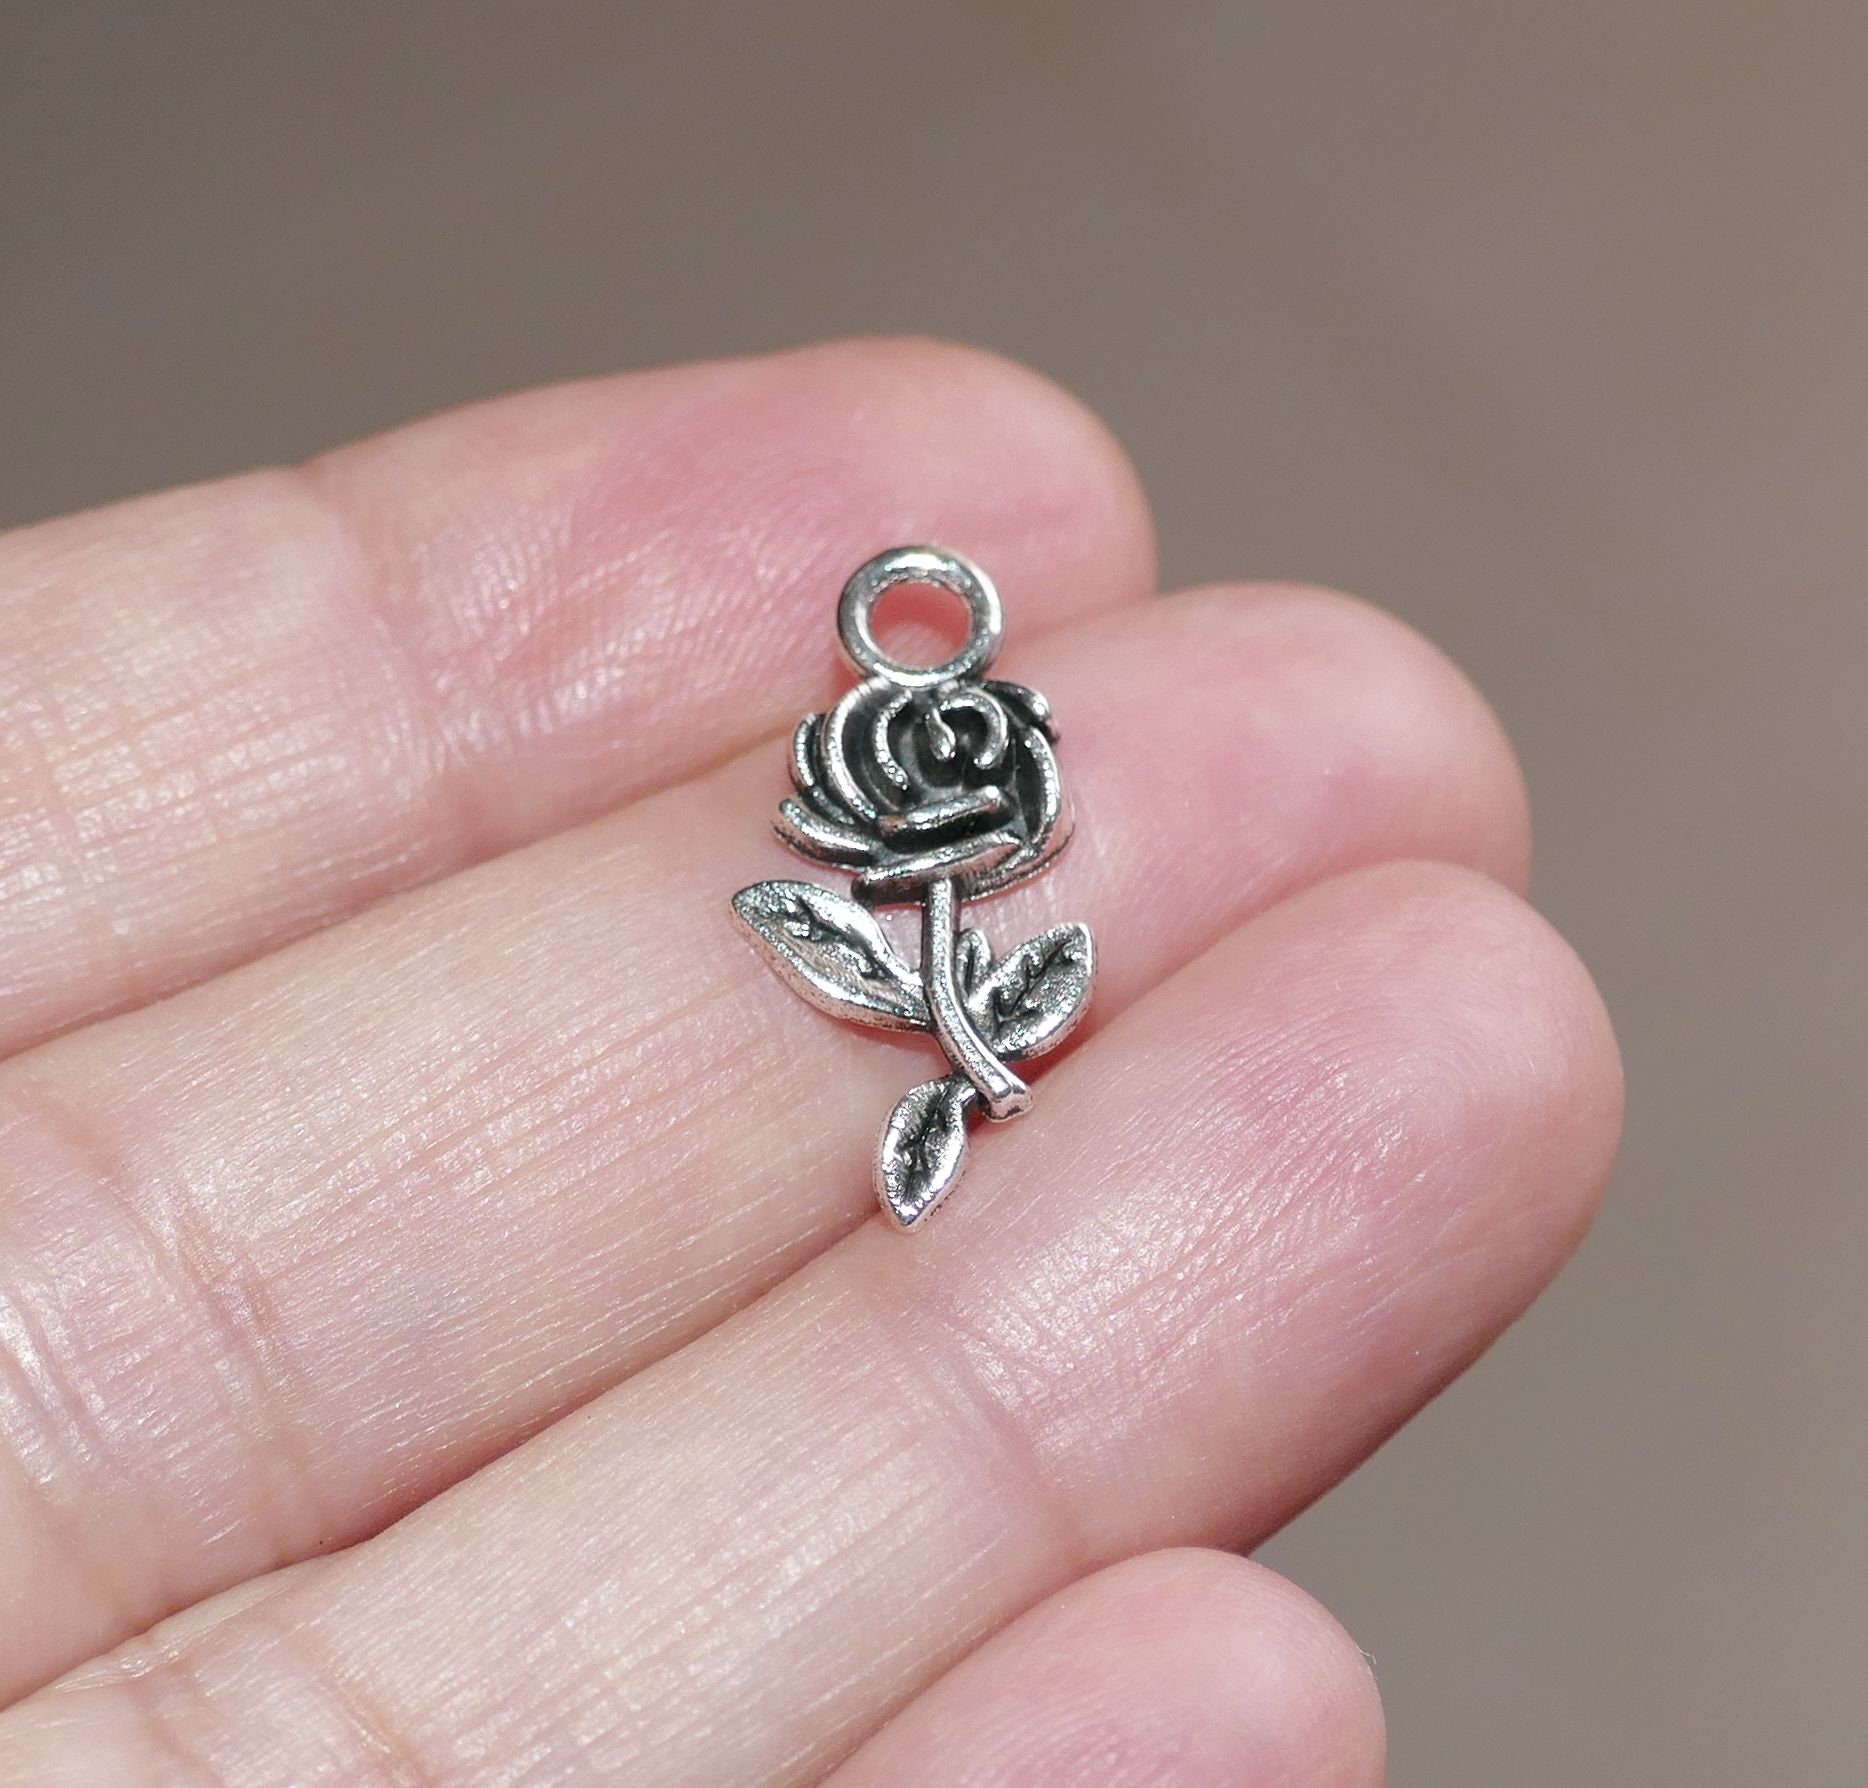 8x Rose Charms for Bracelet/Necklace/Earrings, Silver/Gold/Bronze Flower Charms C755